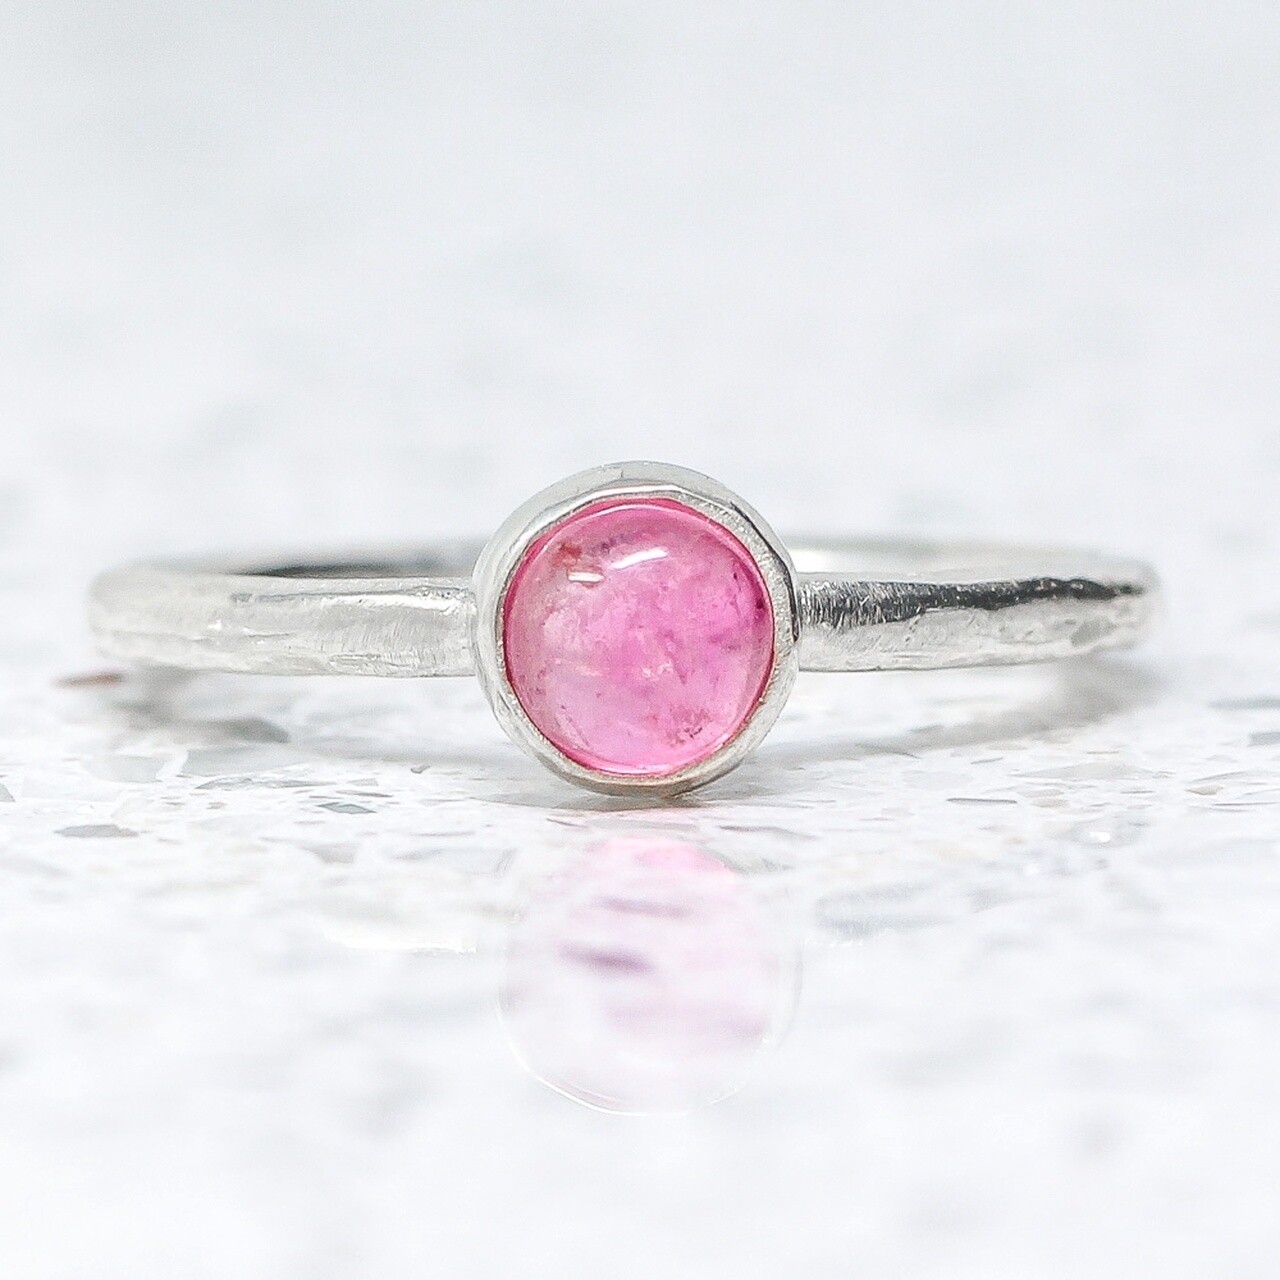 Beaten Silver Ring With Pink Tourmaline By Fi Mehra